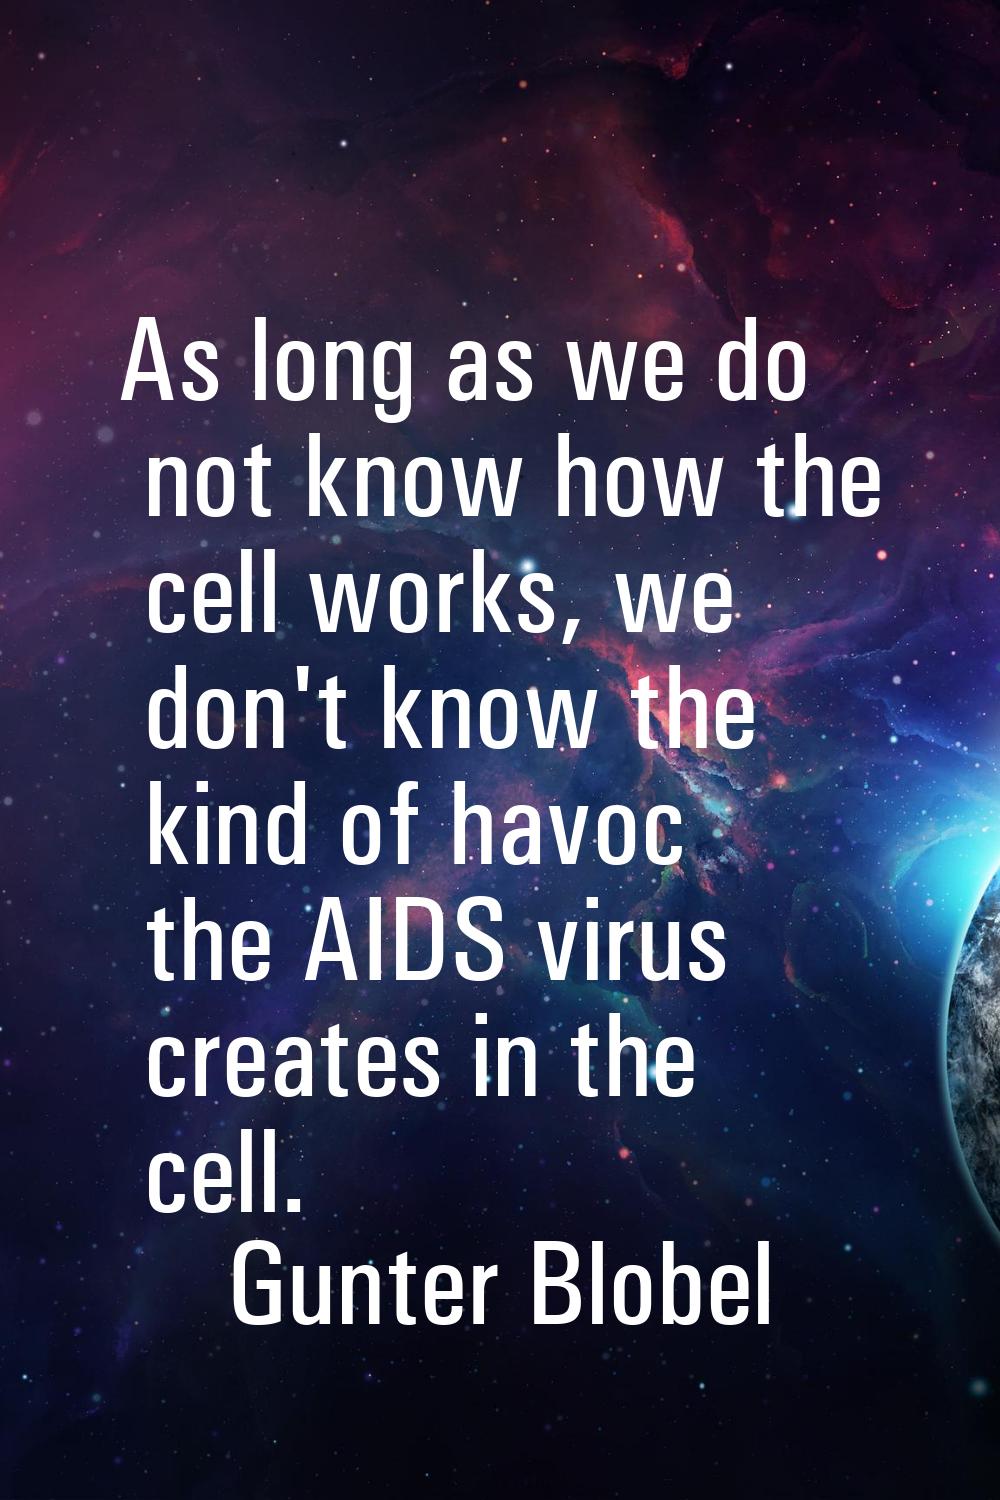 As long as we do not know how the cell works, we don't know the kind of havoc the AIDS virus create